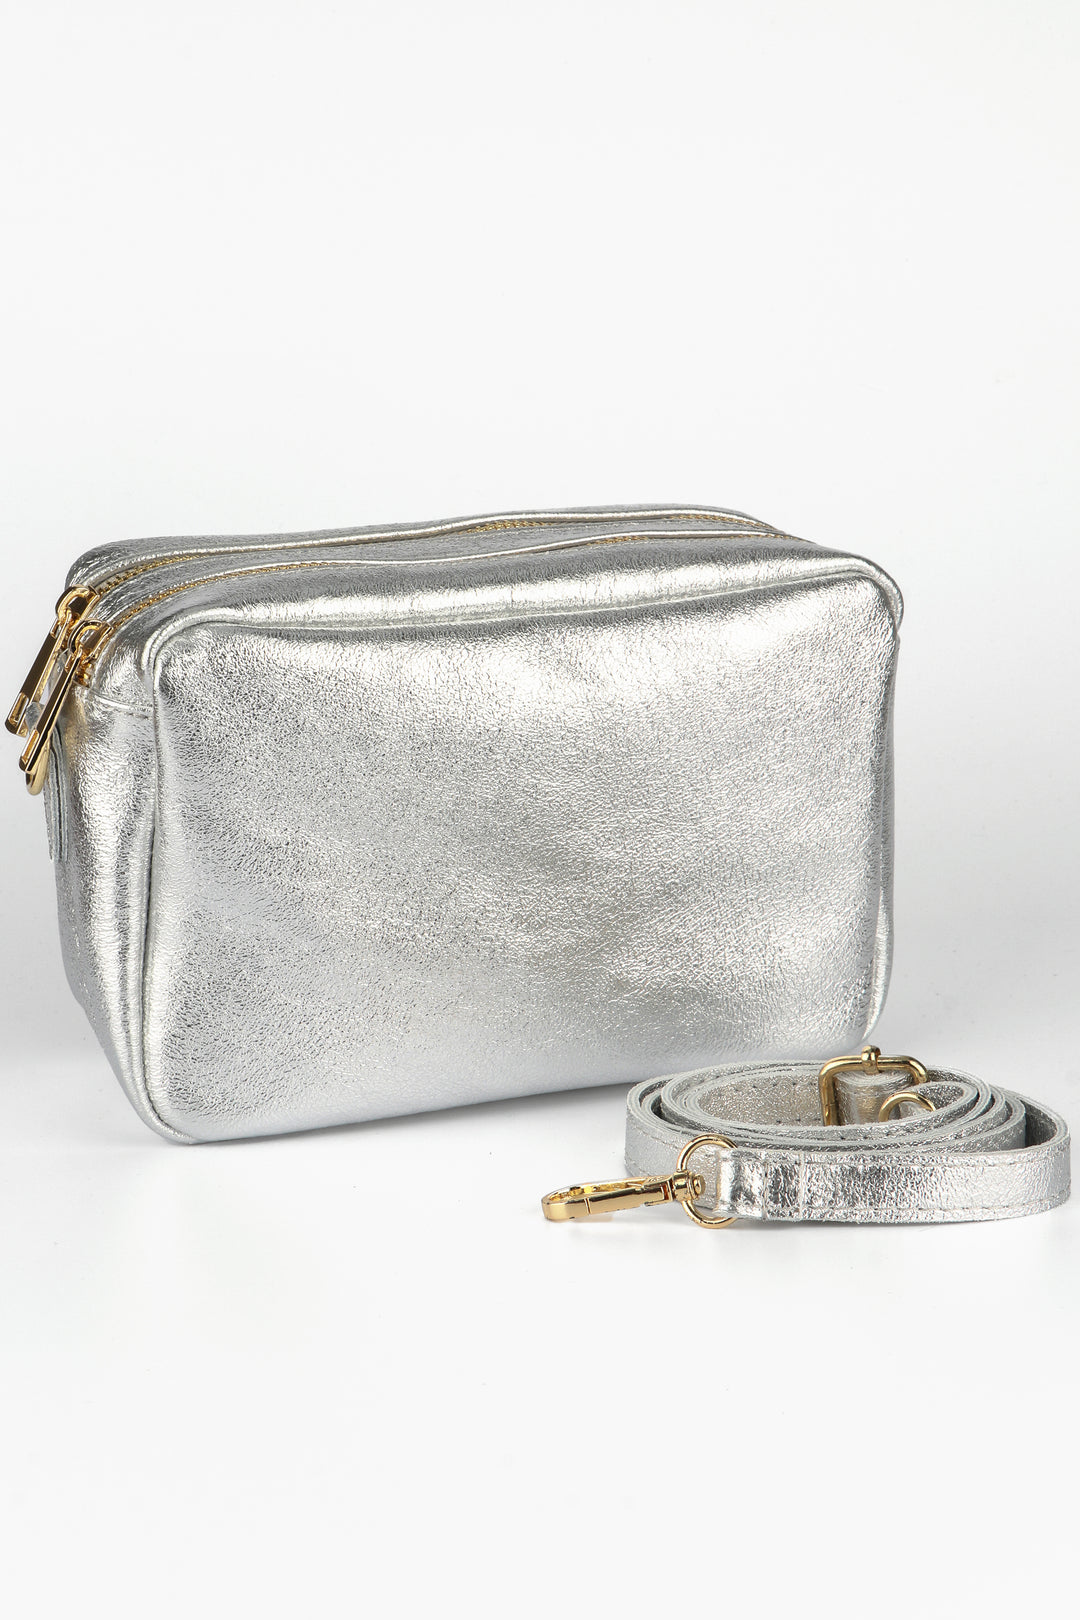 silver leather cross body camera bag with a matching detachable bag strap and two zip closing compartments